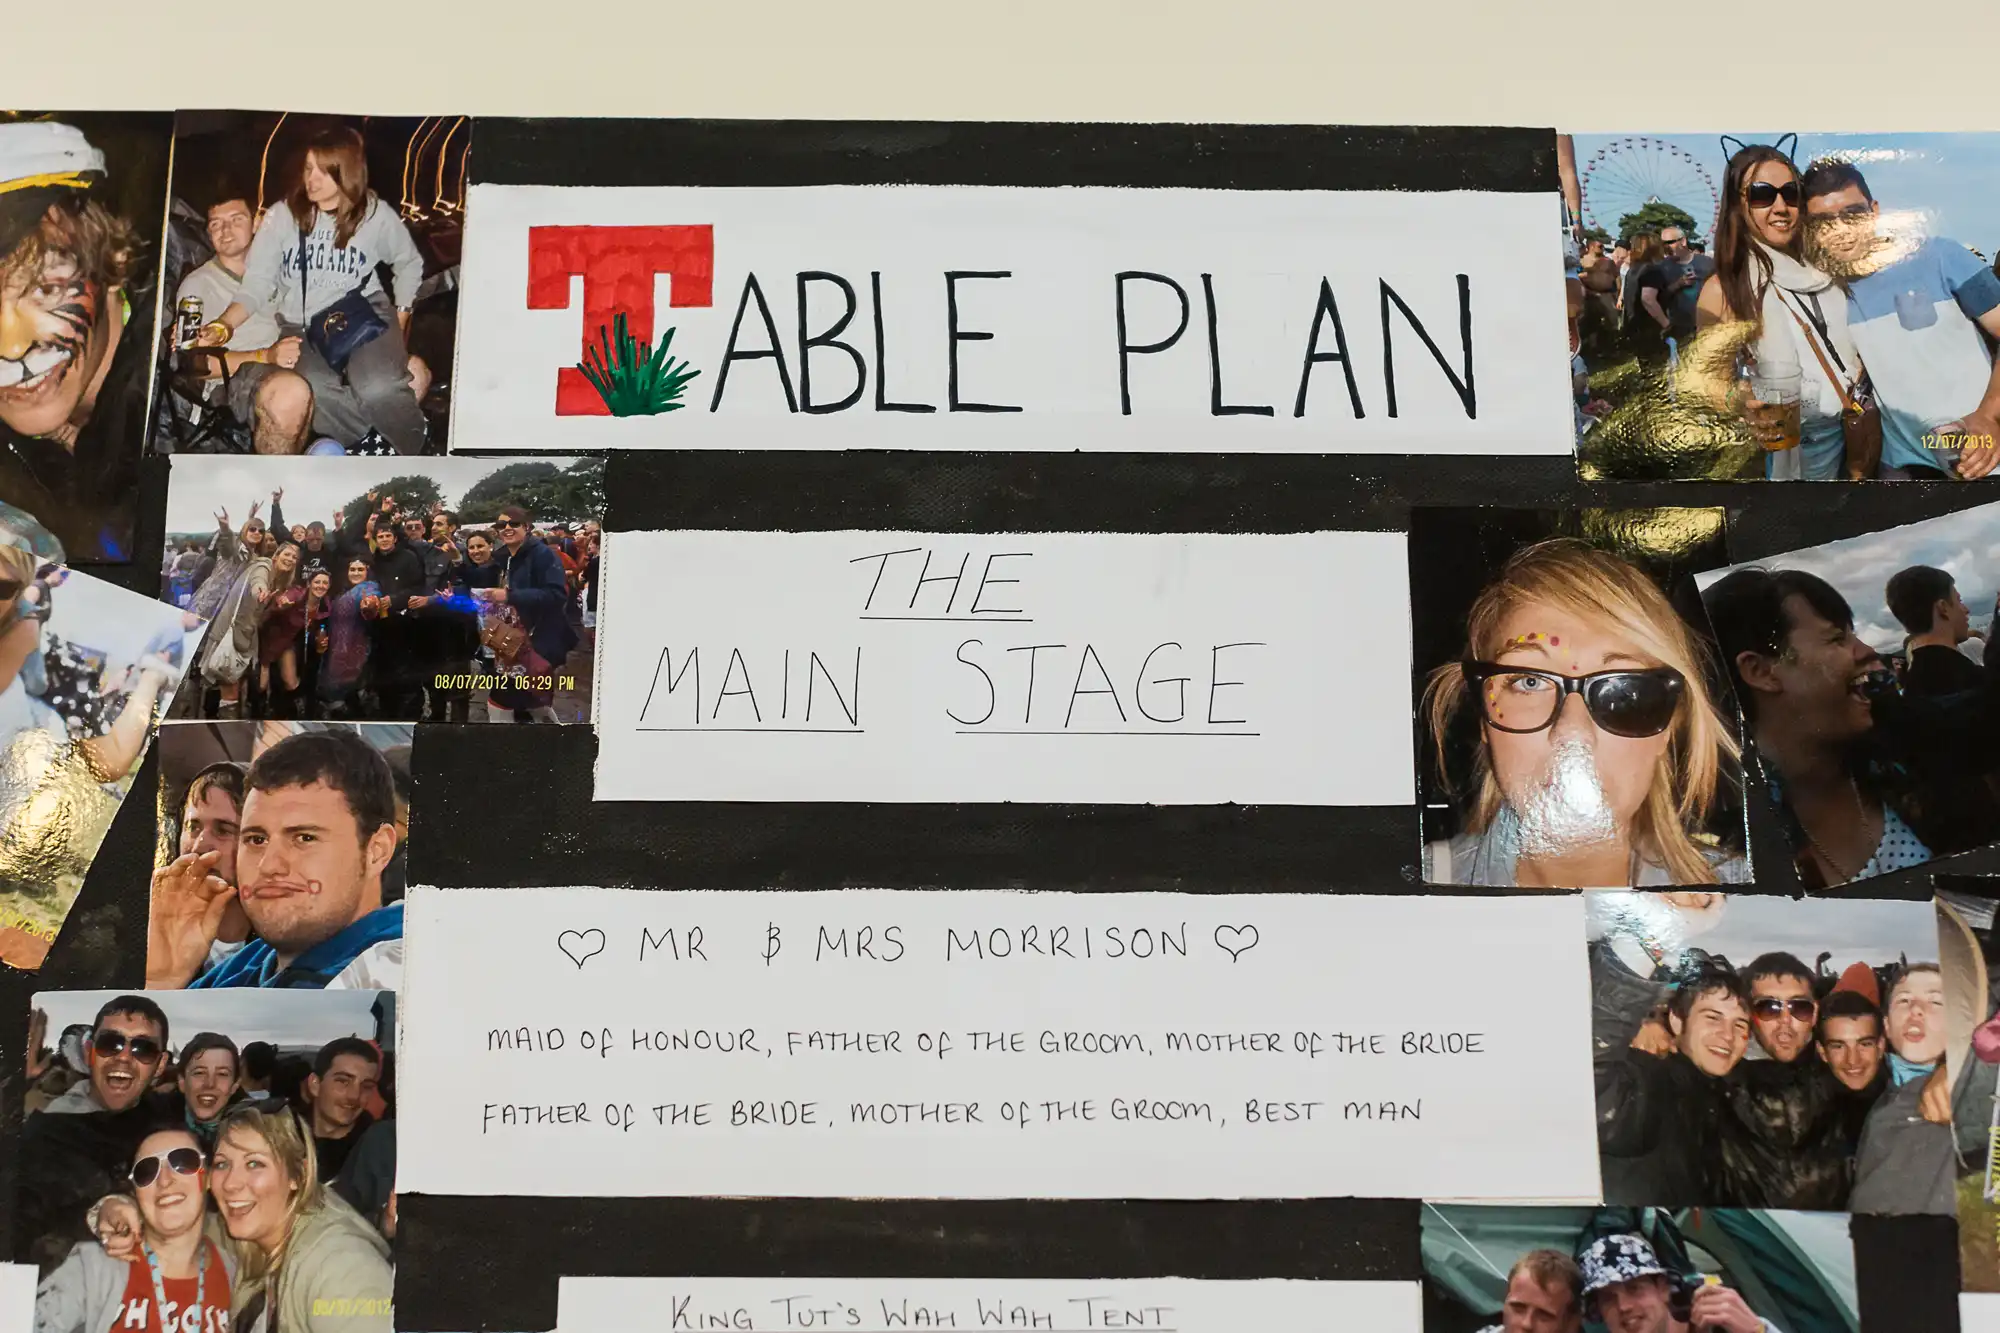 A bulletin board displaying a wedding seating chart titled "table plan," with photos of guests and labeled sections like "the main stage.